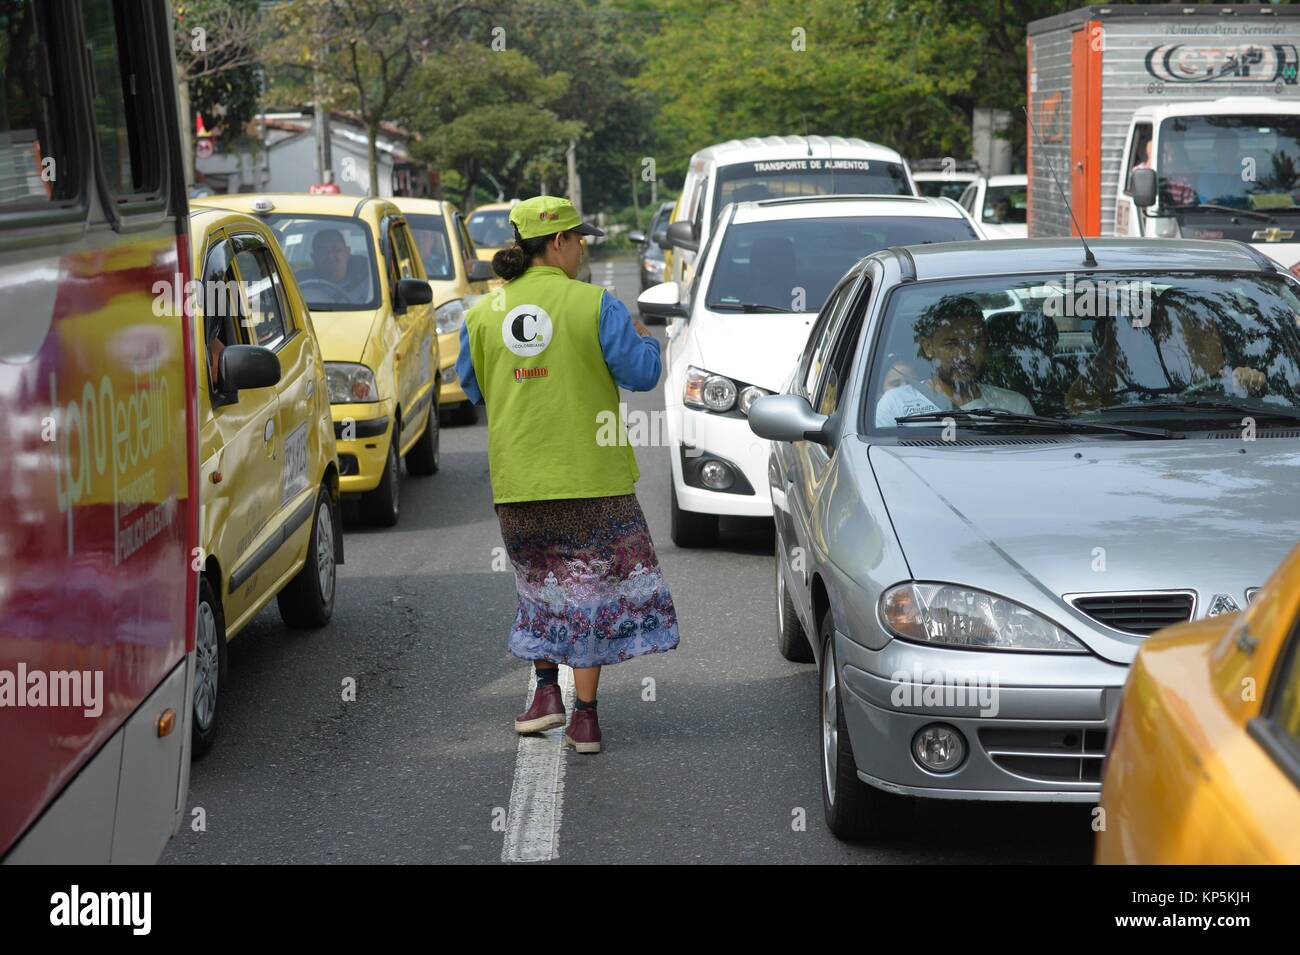 Street vendor trying to sell newspaper to drivers and passengers in Medellin,Colombia. Stock Photo